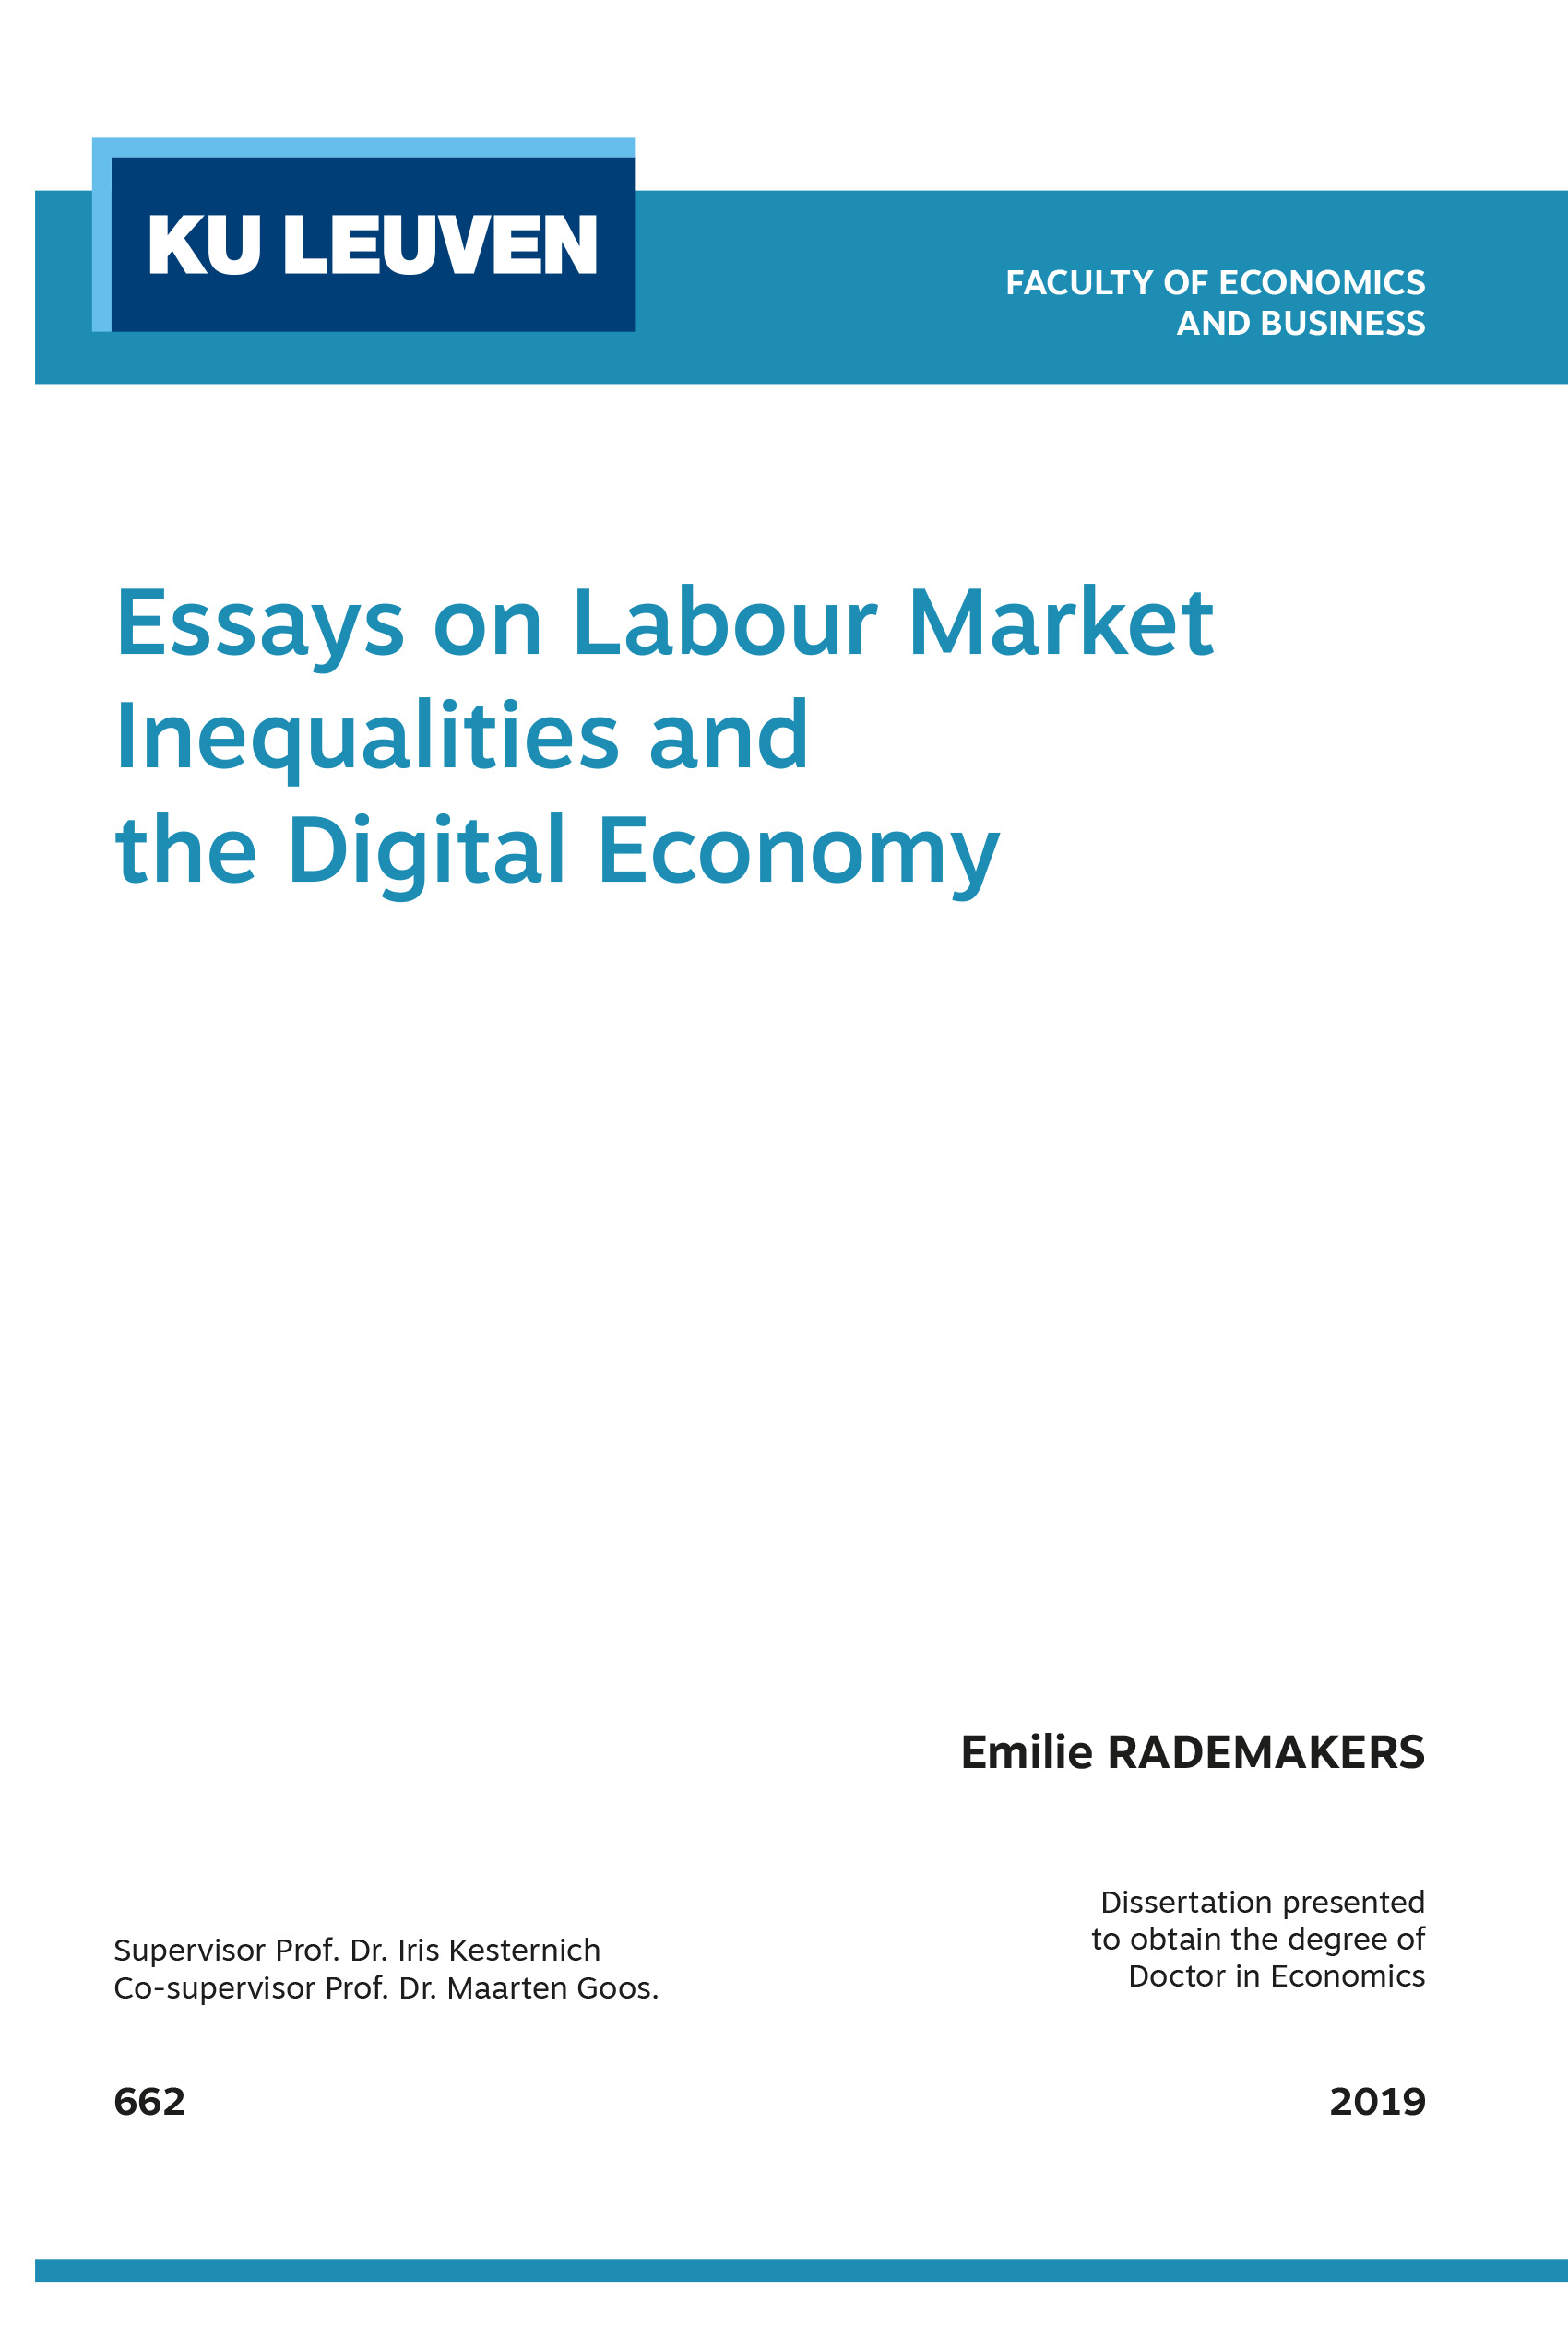 ESSAYS ON LABOUR MARKET INEQUALITIES AND THE DIGITAL ECONOMY